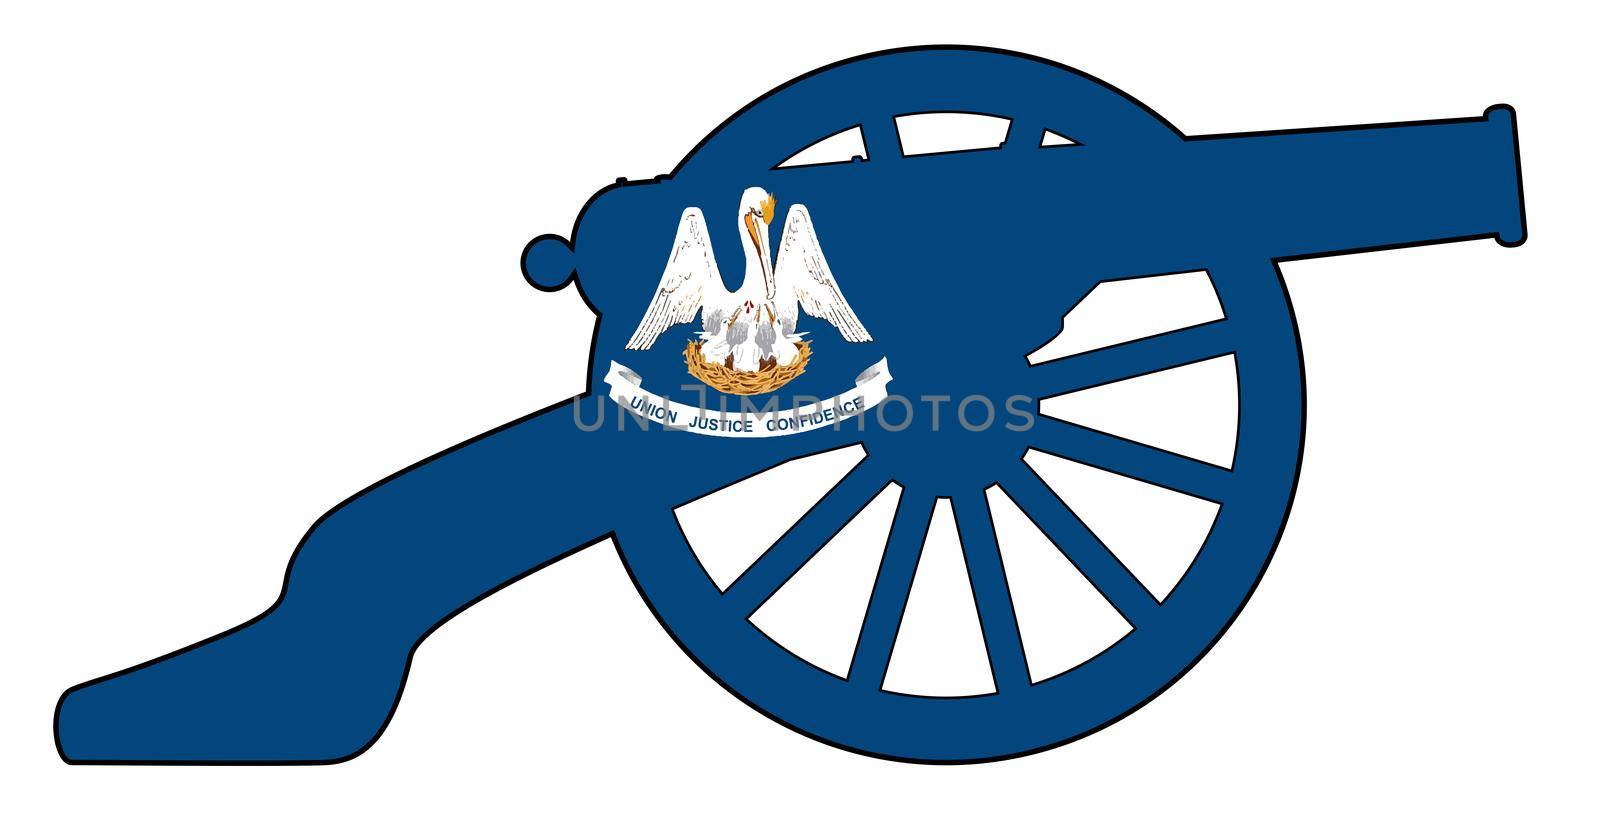 Typical American civil war cannon gun with Louisiana state flag isolated on a white background